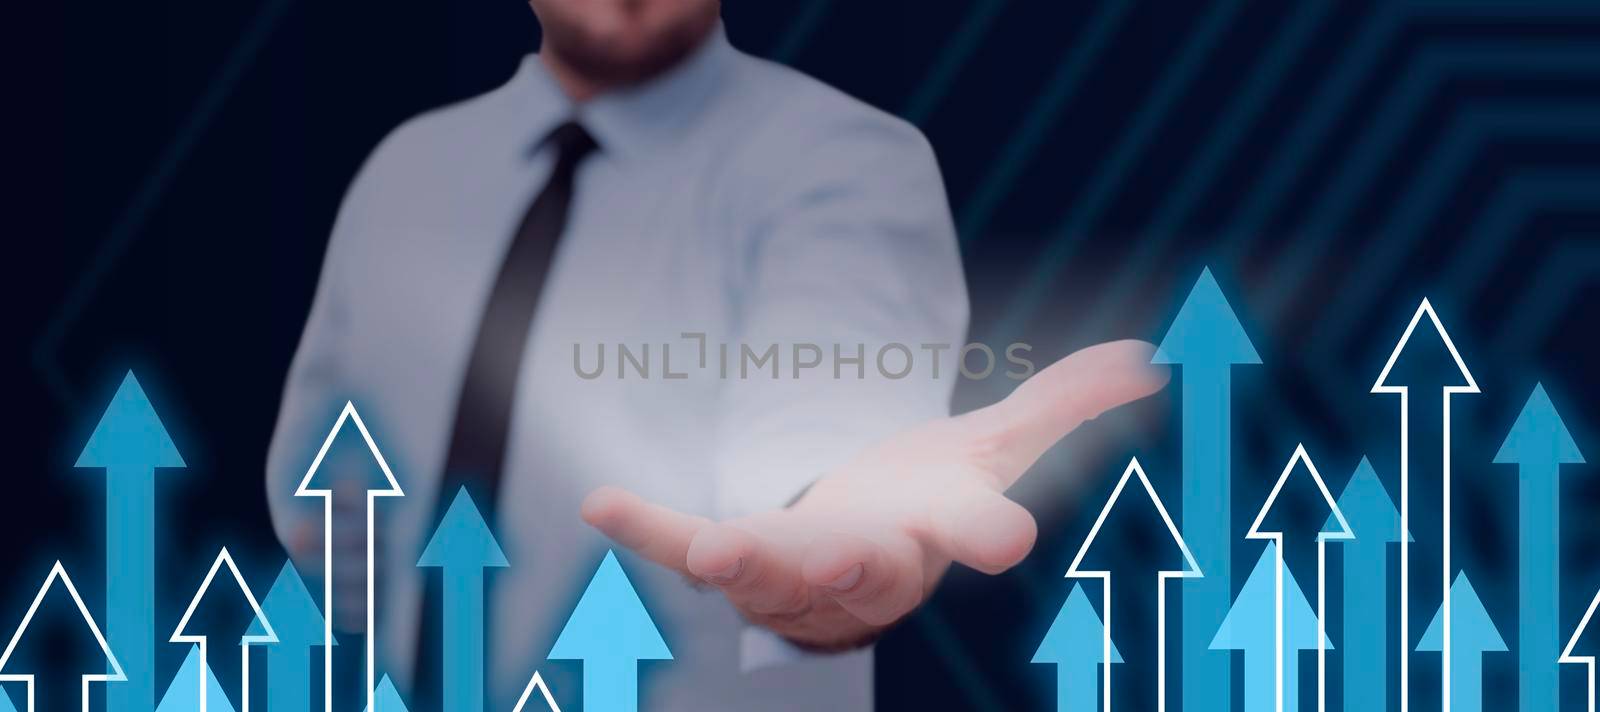 Businessman Reaching Out A Glowing Hand In A Futuristic Design With Arrows Going Up. Man In Necktie Showing Crucial Information And New Concepts In A Presentation. by nialowwa